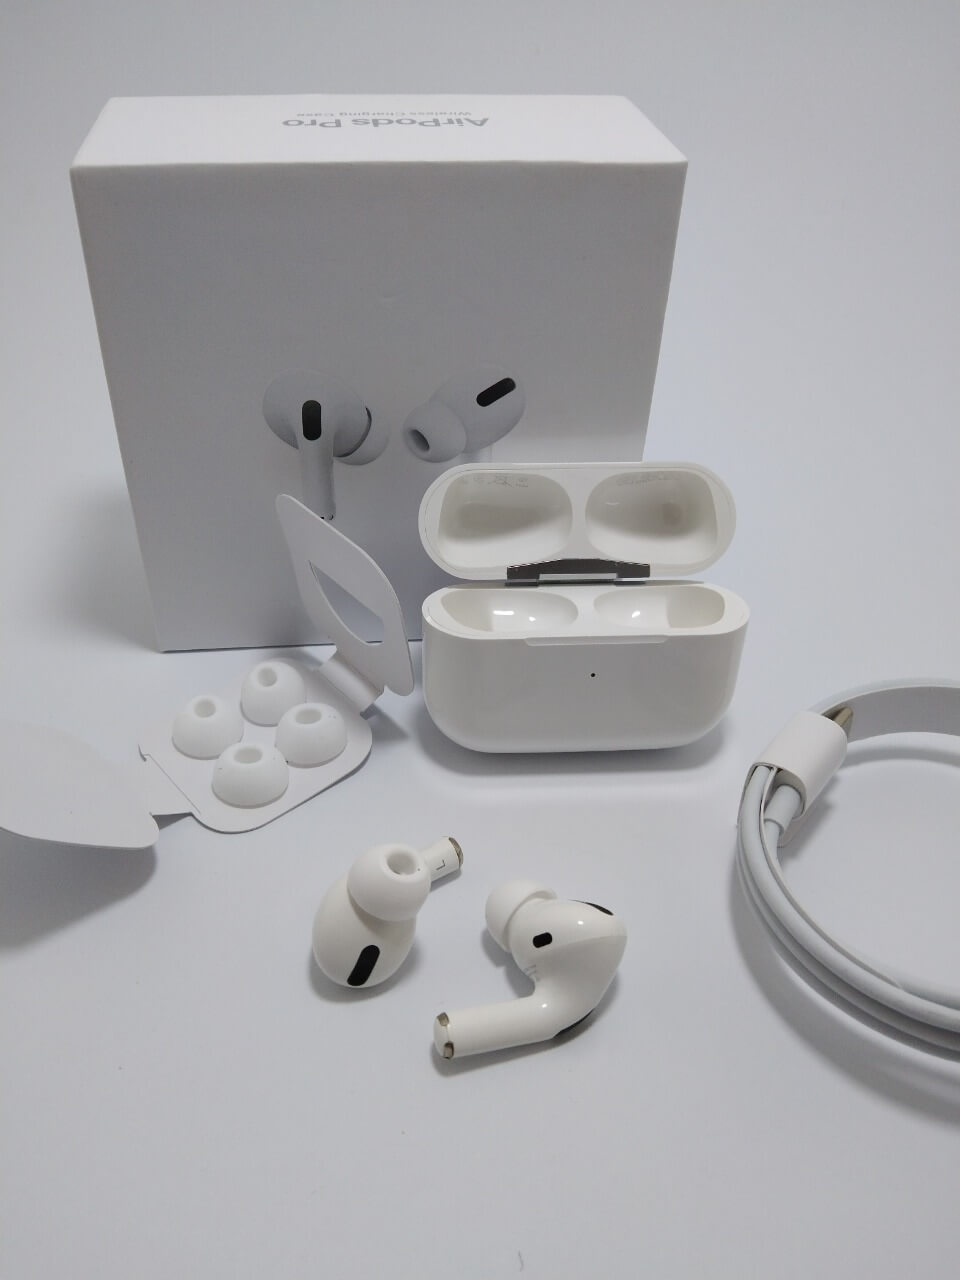 Earpods Pro (3rd Generation stereo bass with wireless charging and popup window)